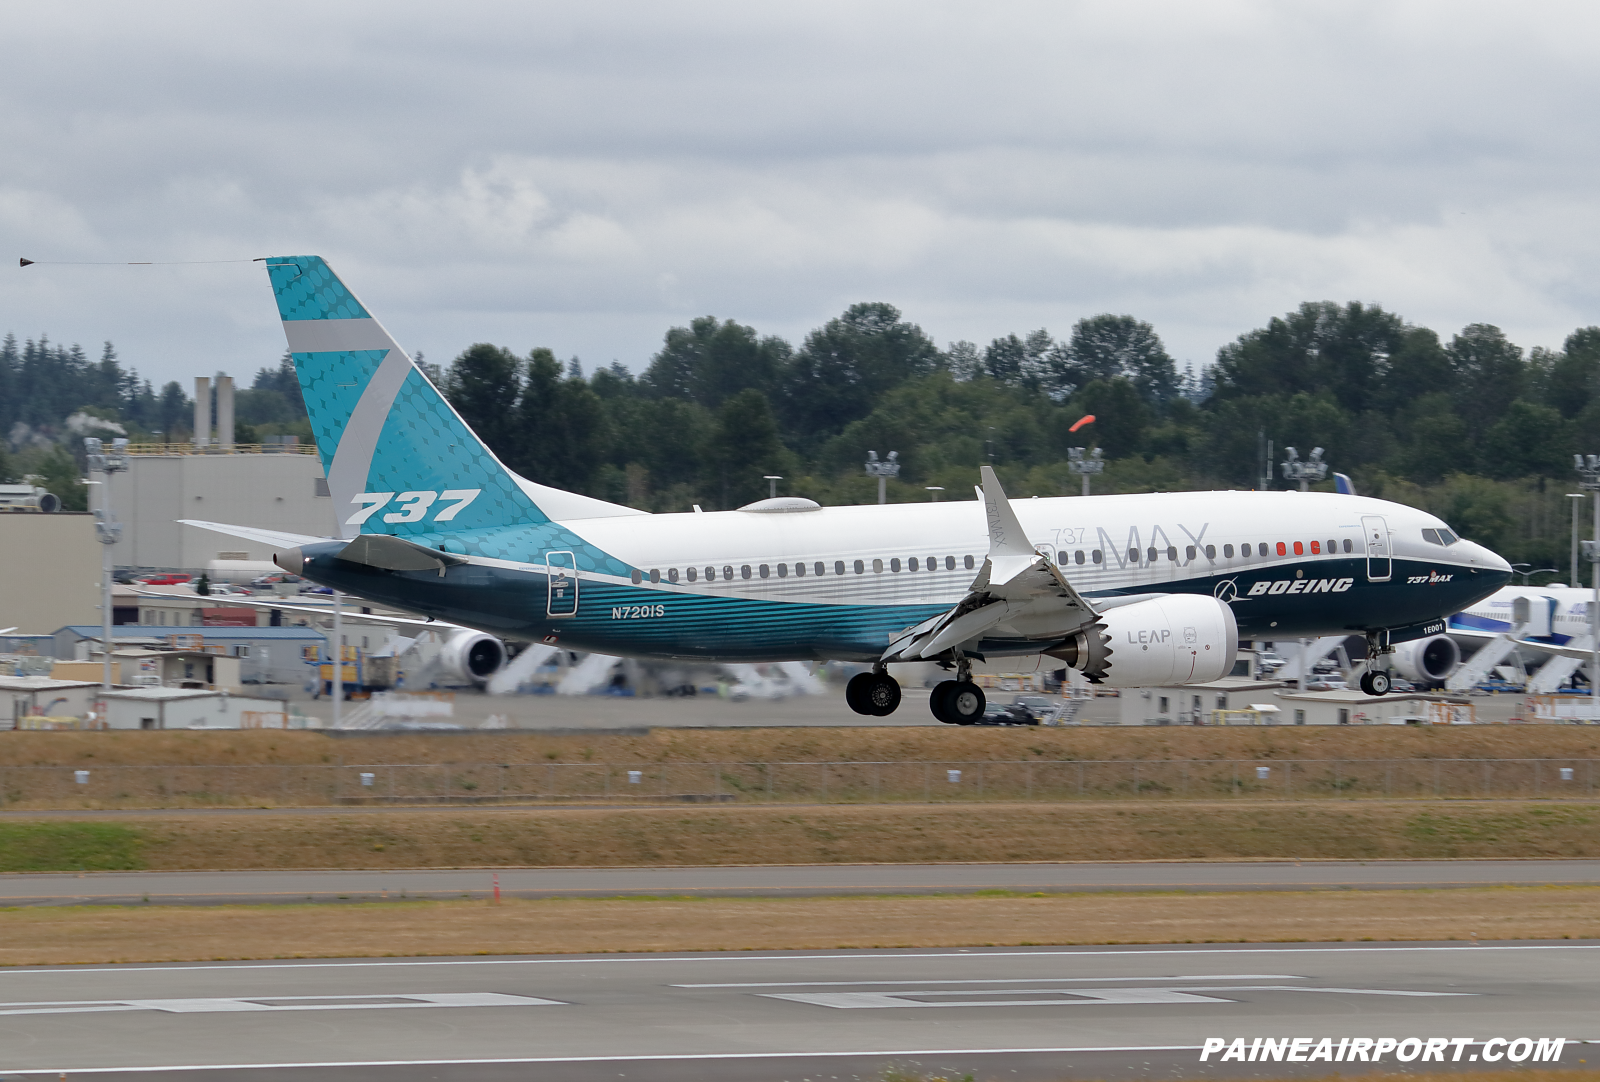 737 N7201S at KPAE Paine Field